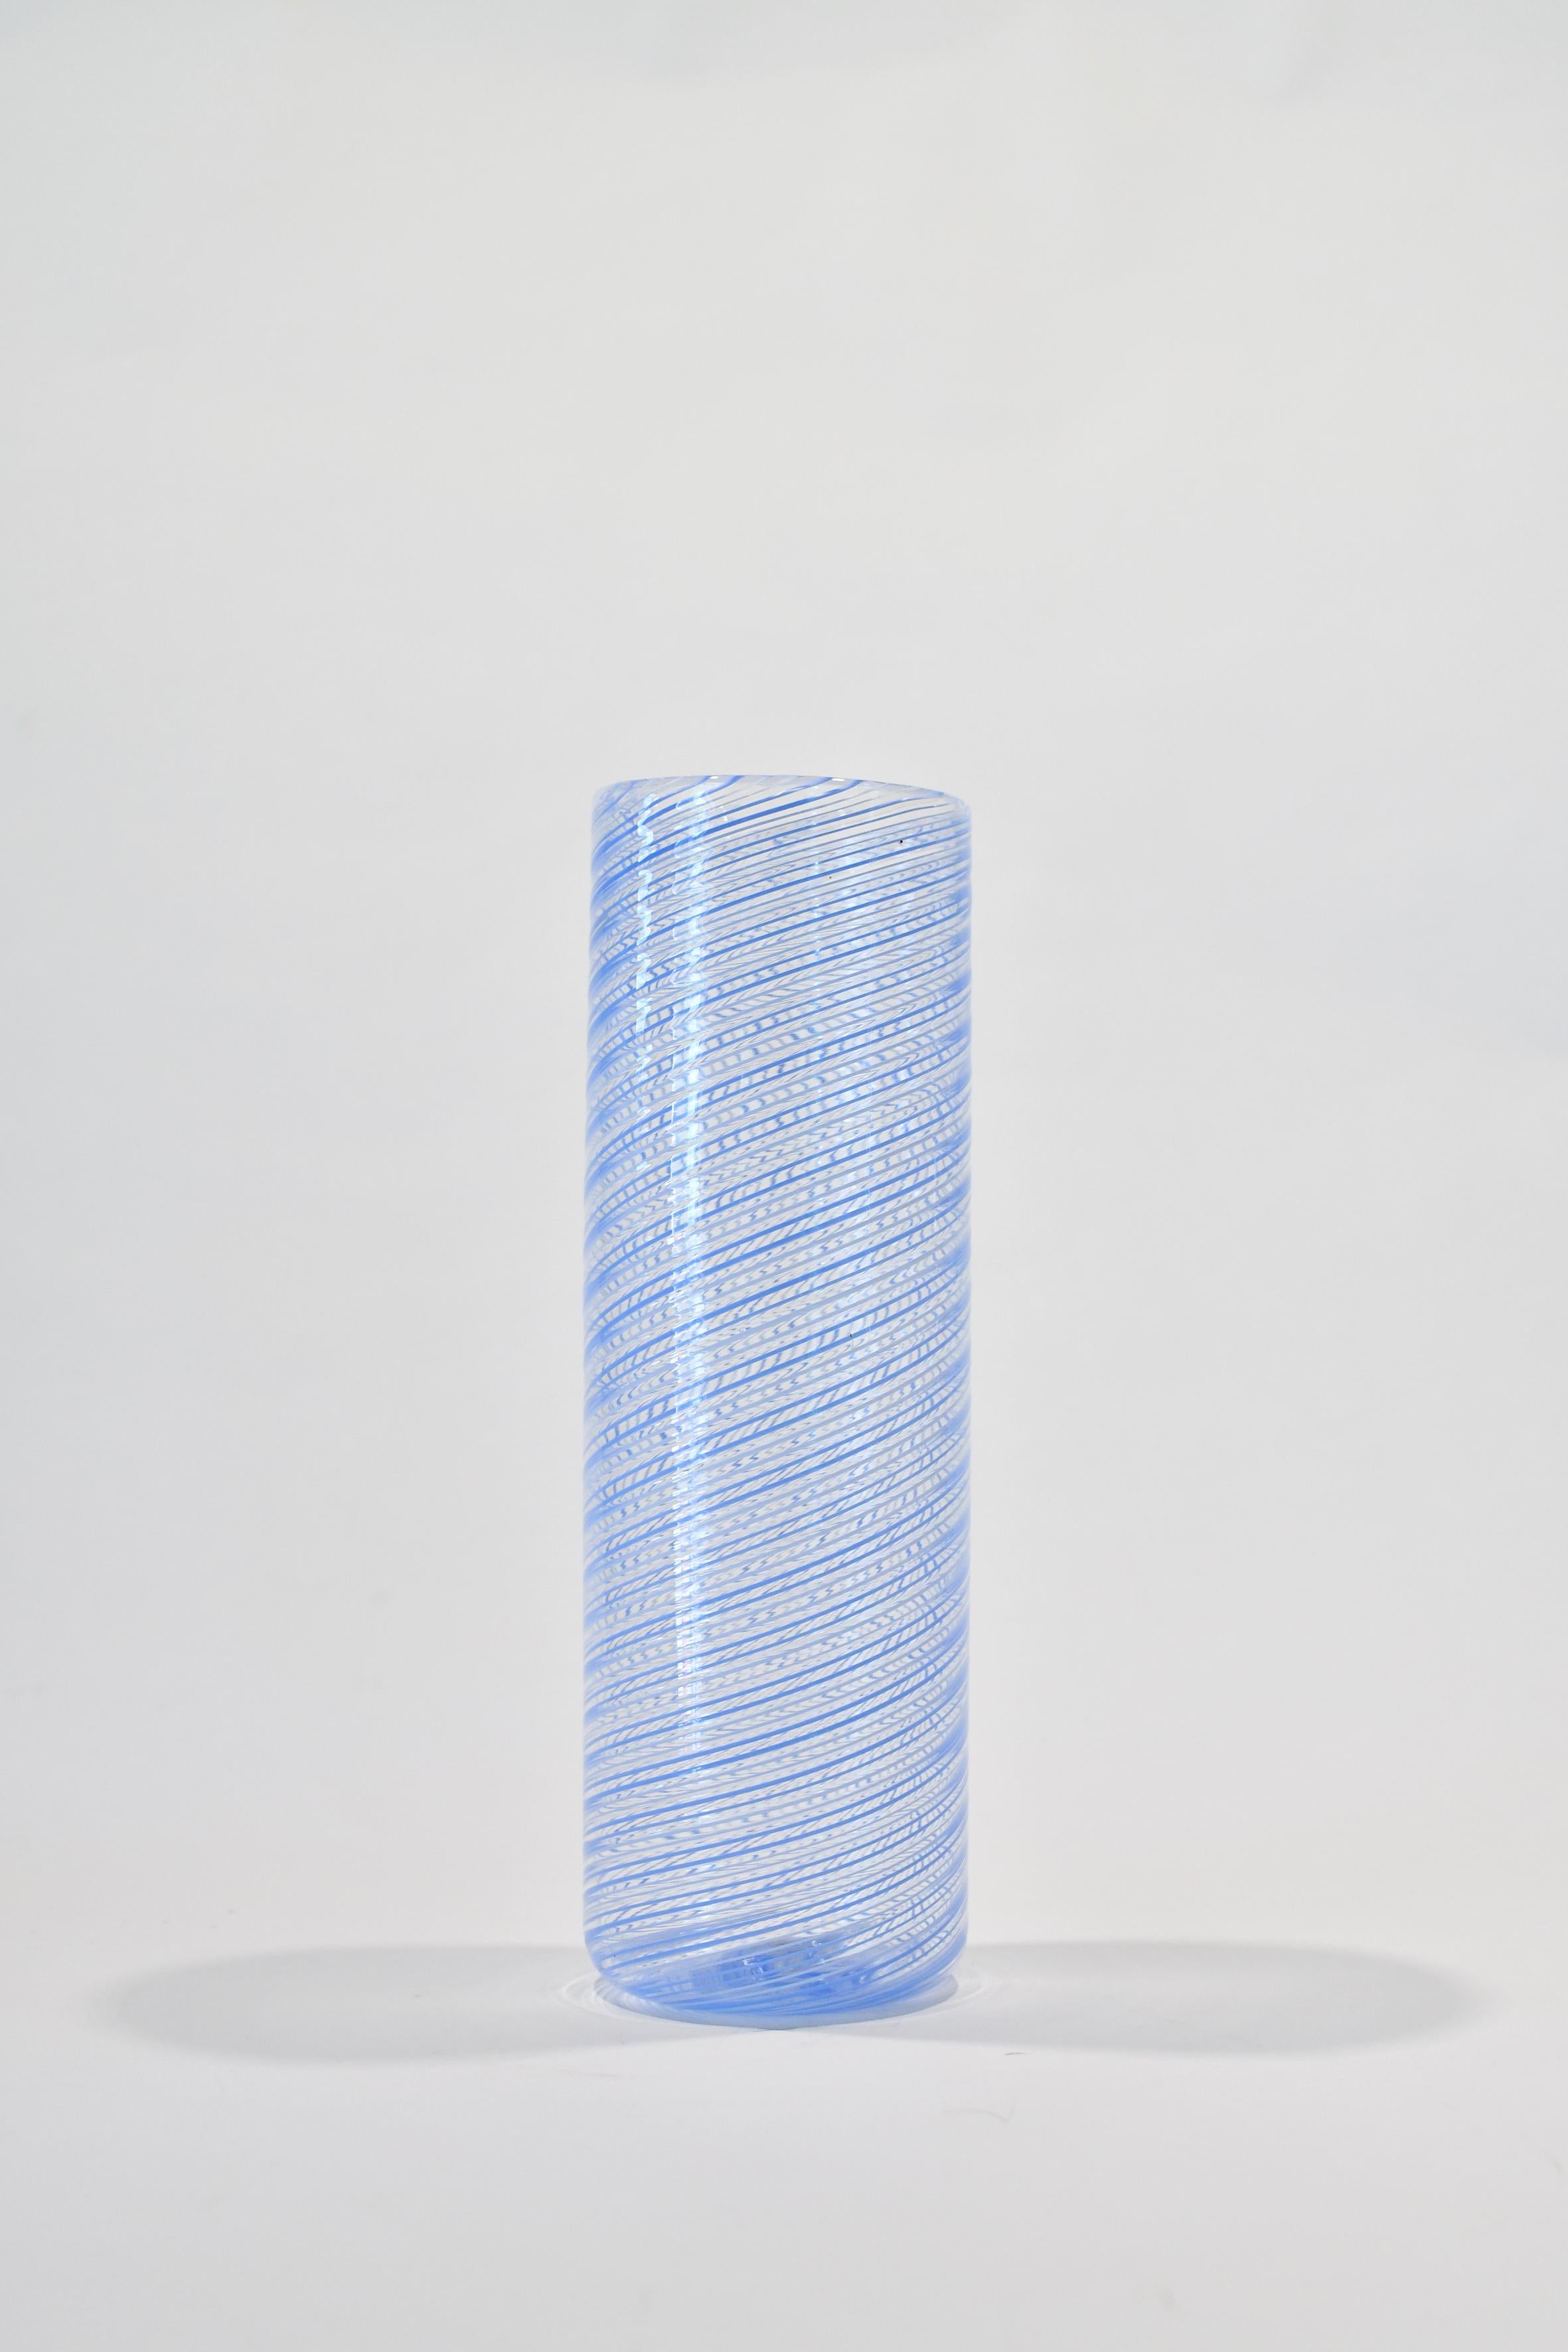 Doppio filo is a collection of vases made by combining two different colours of filigree rods. The linear, oblique pattern is obtained thanks to a refined glass making technique called “mezza filigrana” invented in Murano in the first half of the